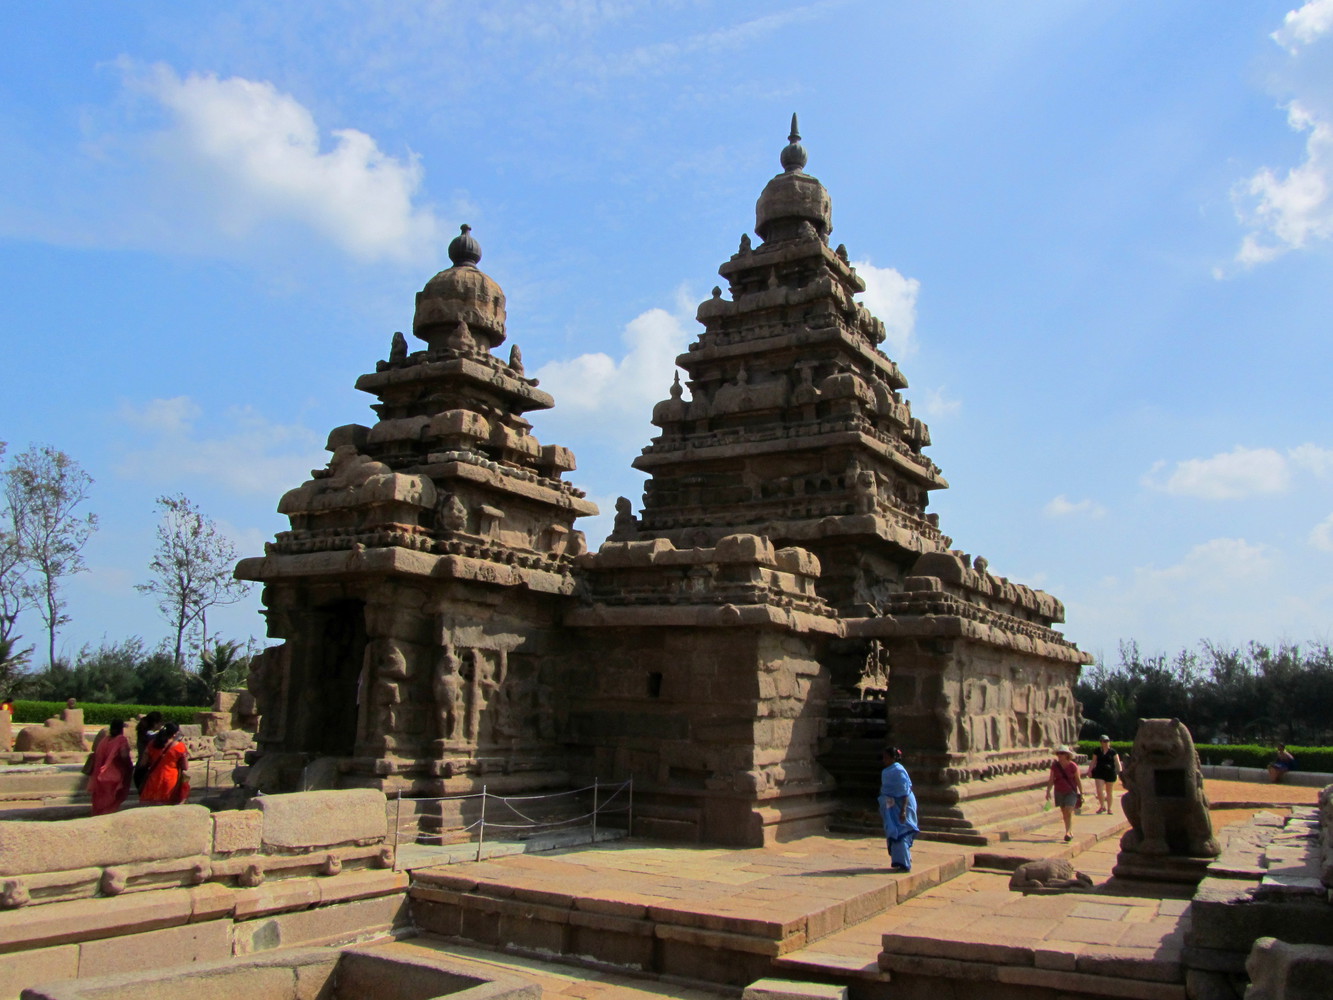 A granite temple known as Shore Temple with two towers